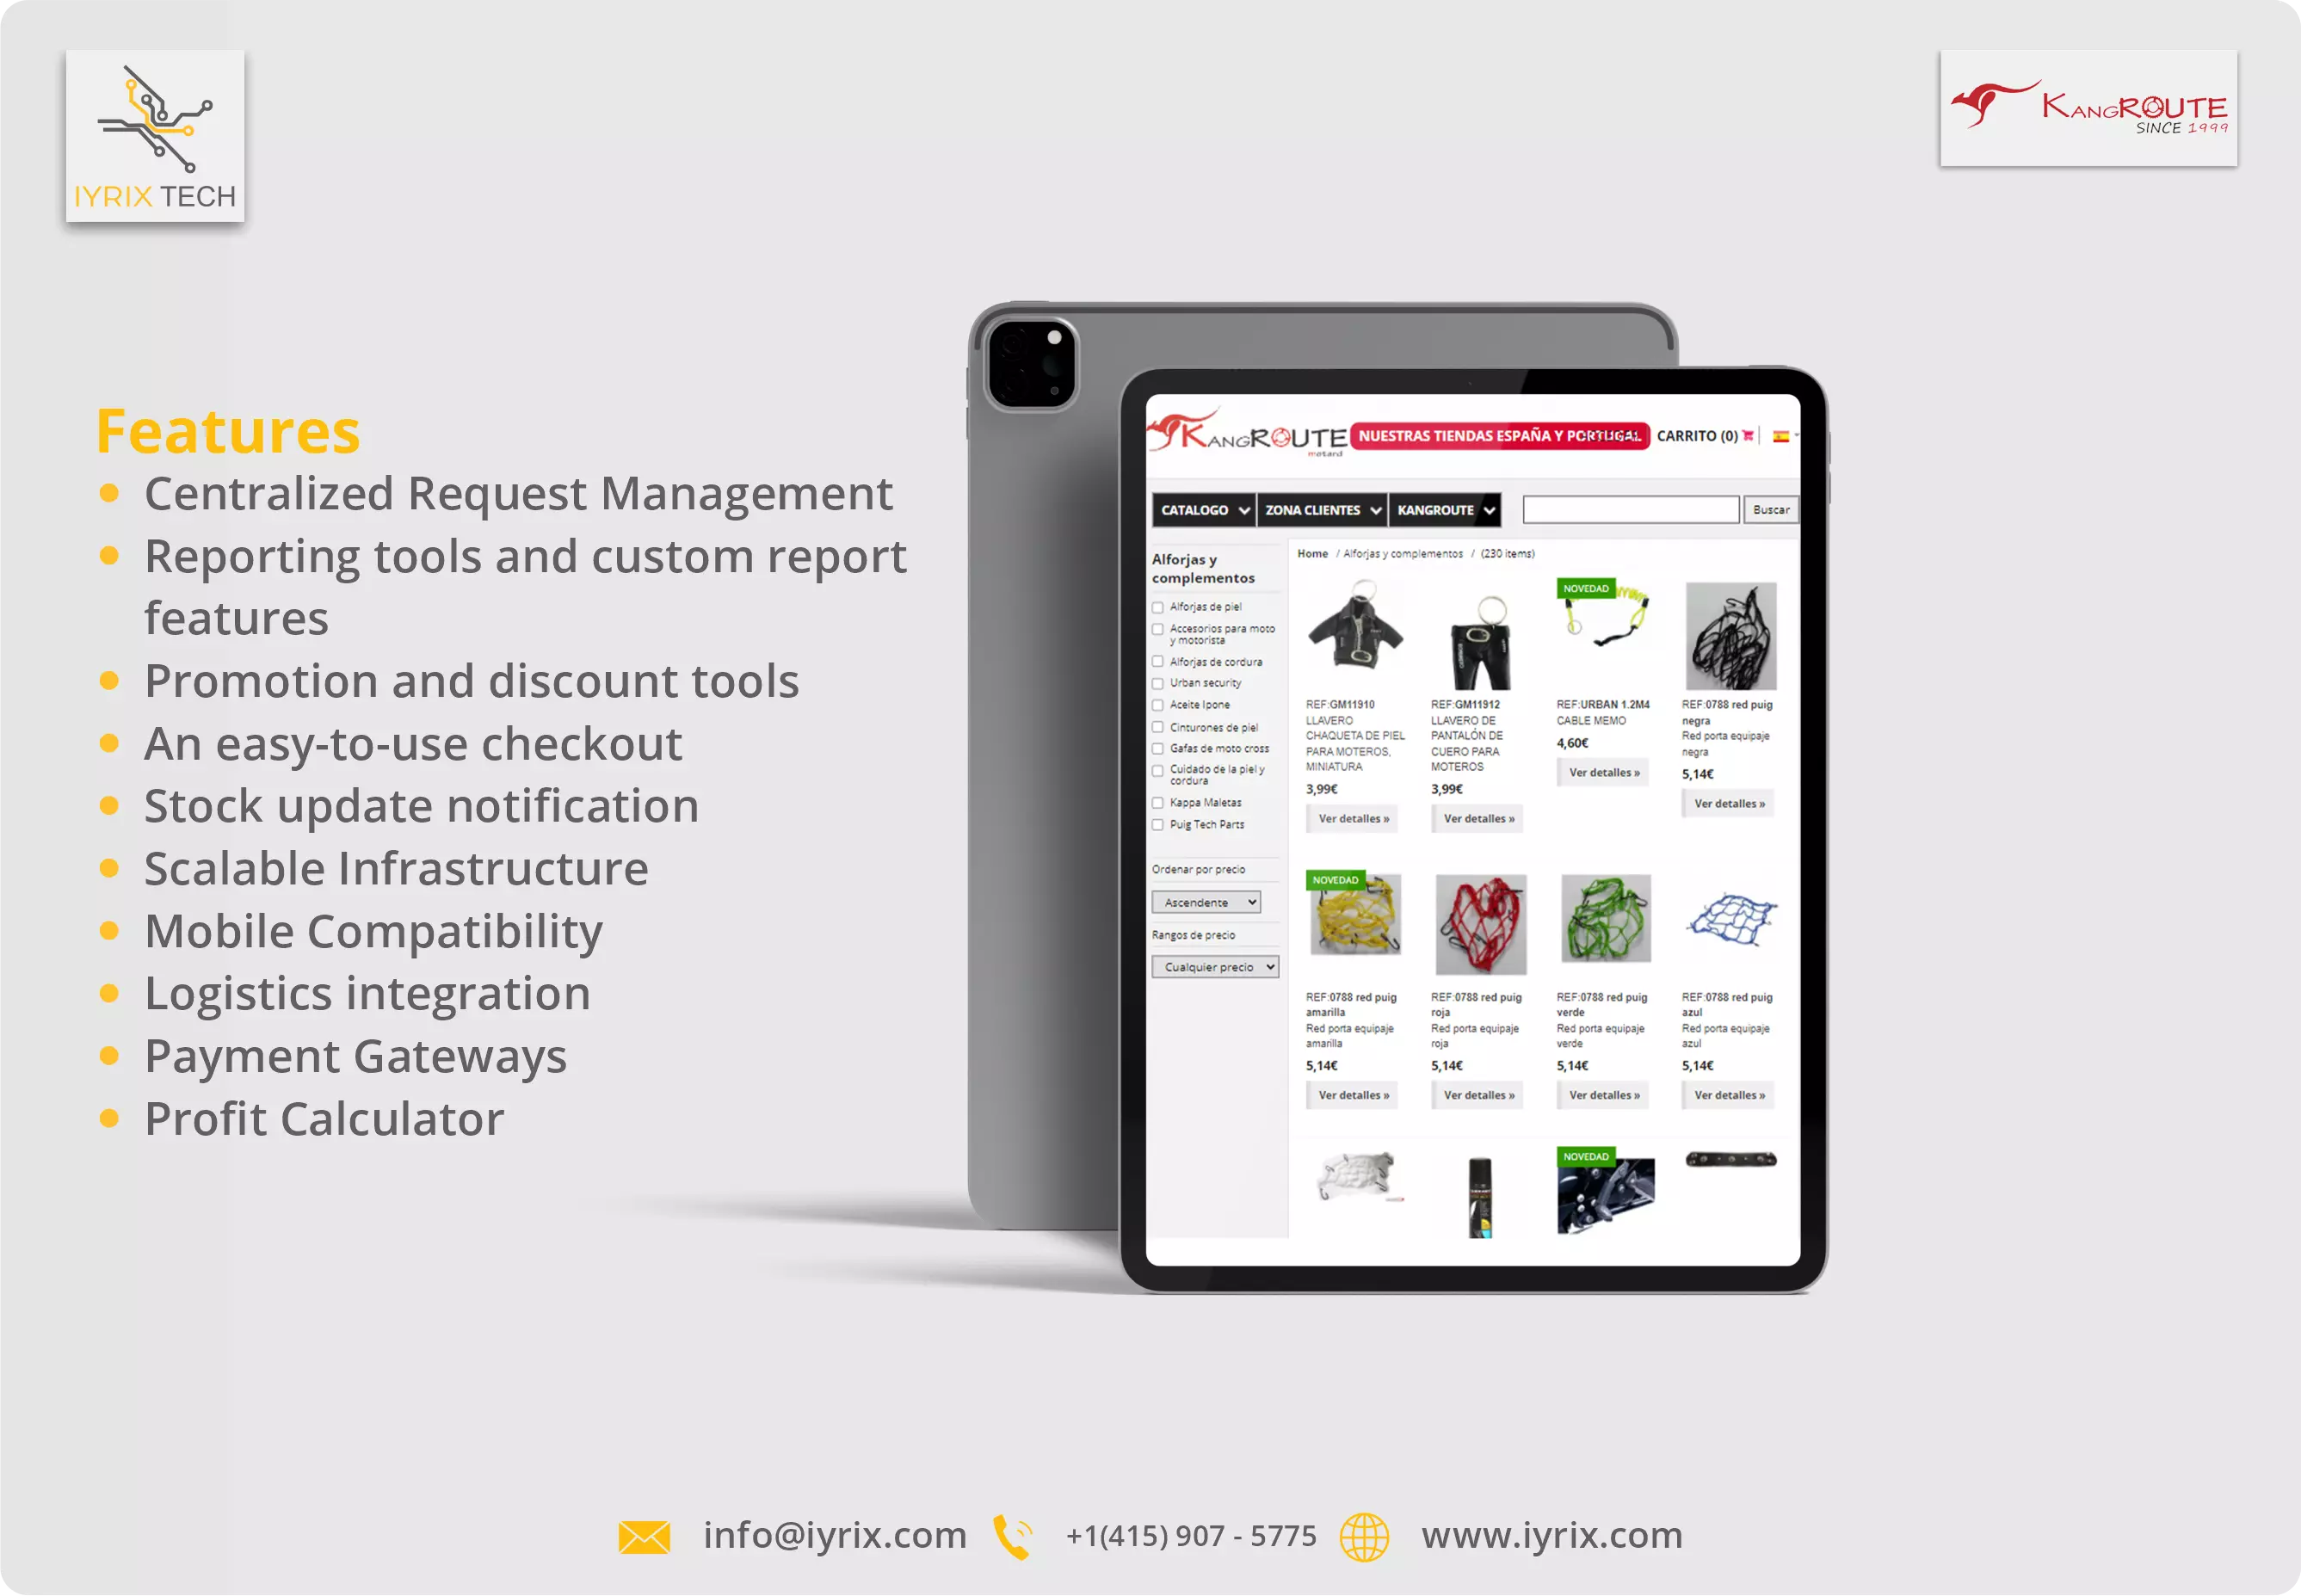 Centralized Request Management
                                                                Reporting tools and custom report 
                                                                features
                                                                Promotion and discount tools
                                                                An easy-to-use checkout
                                                                Stock update notification
                                                                Scalable Infrastructure
                                                                Mobile Compatibility
                                                                Logistics integration
                                                                Payment Gateways
                                                                Profit Calculator
                                                                